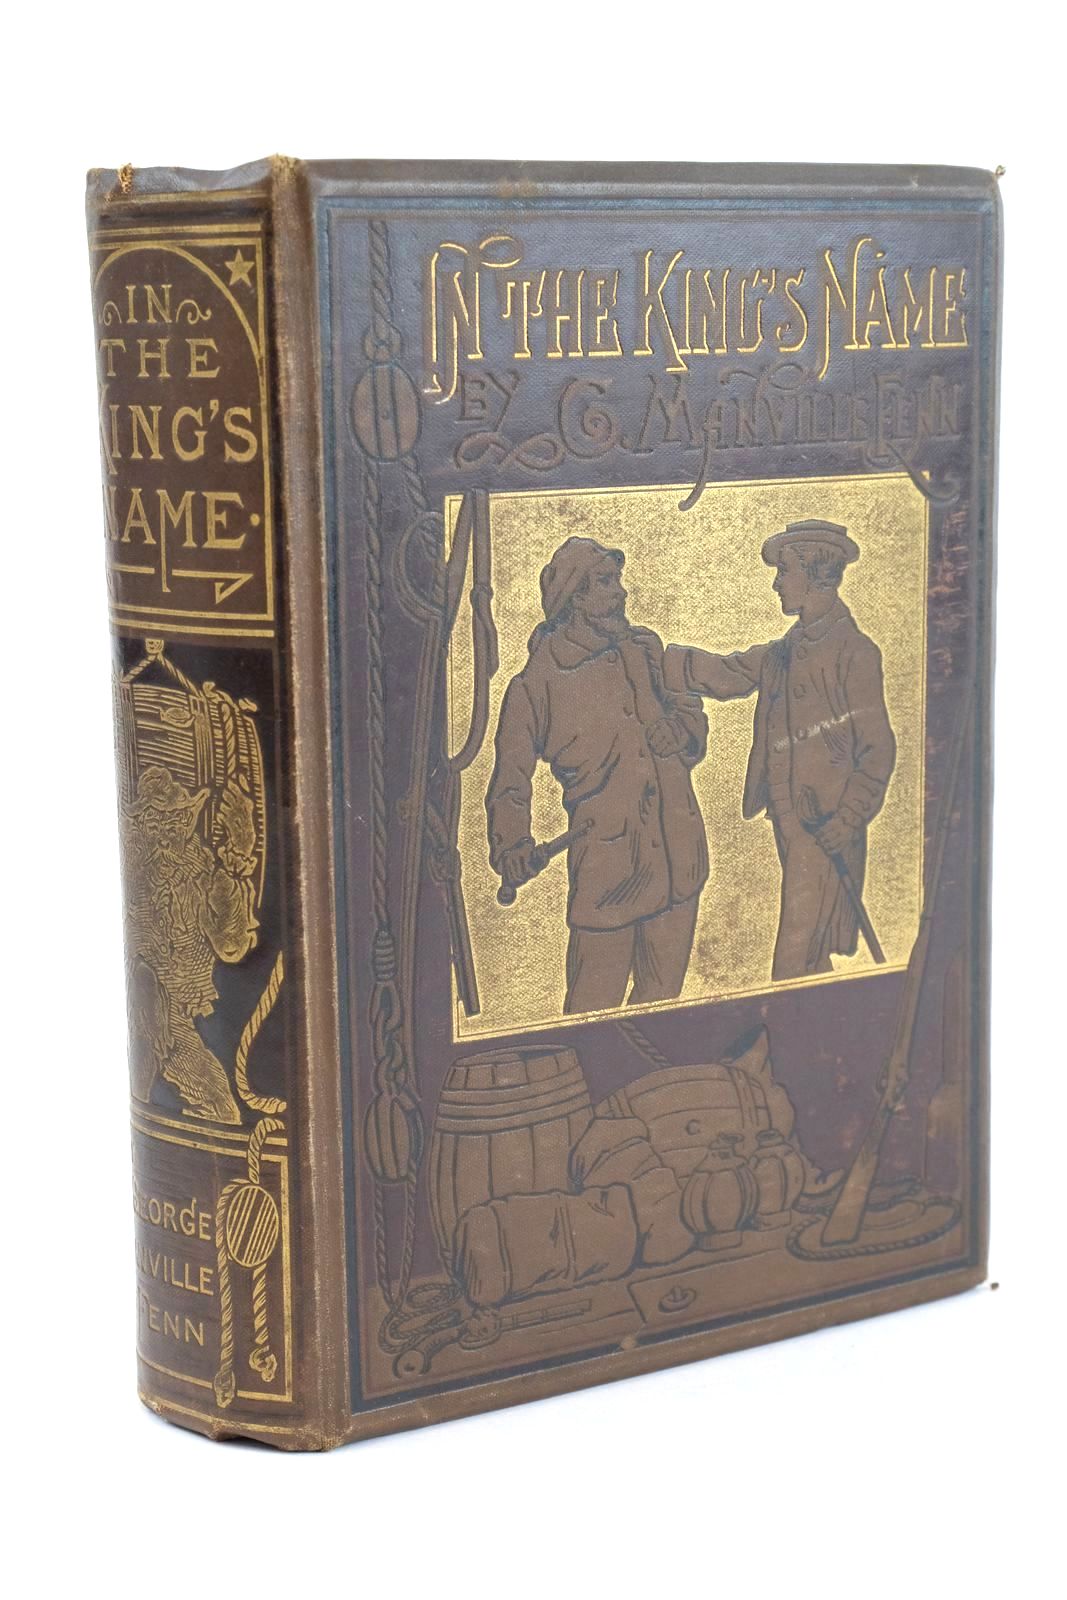 Photo of IN THE KING'S NAME written by Fenn, George Manville illustrated by Browne, Gordon published by Blackie And Son Limited (STOCK CODE: 1324594)  for sale by Stella & Rose's Books